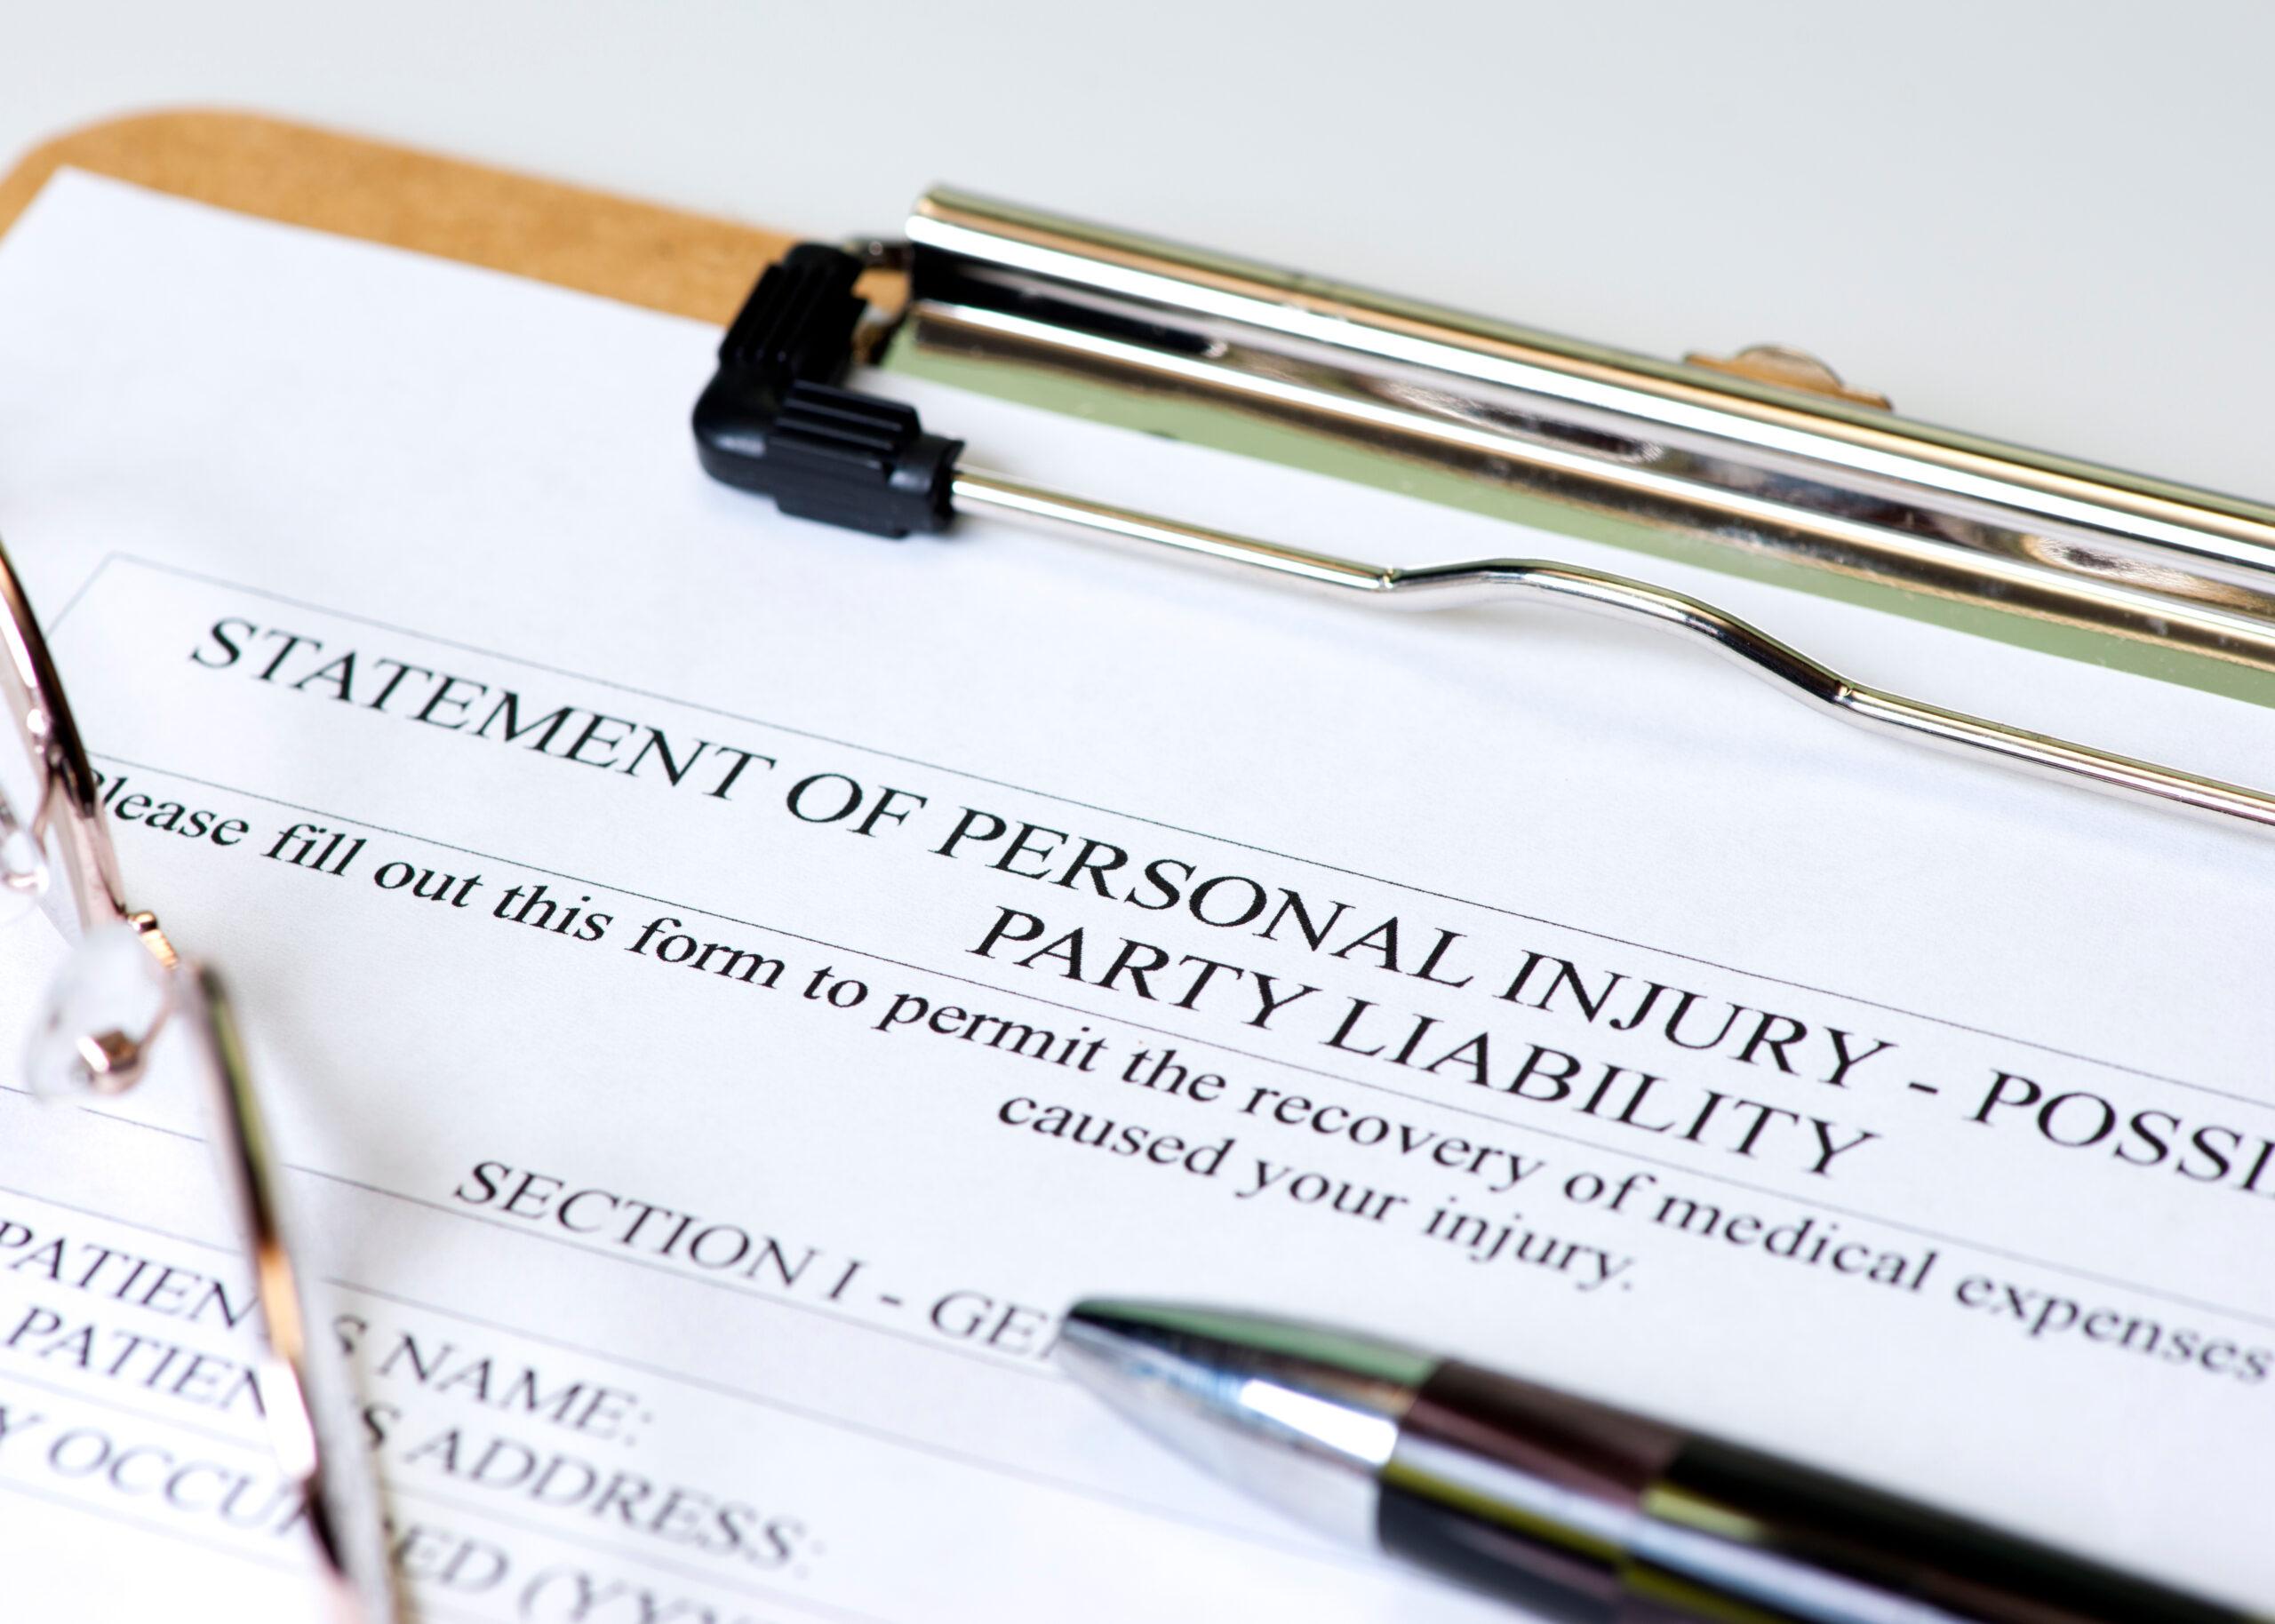 Personal injury law is all about helping people hurt by someone else’s careless actions.